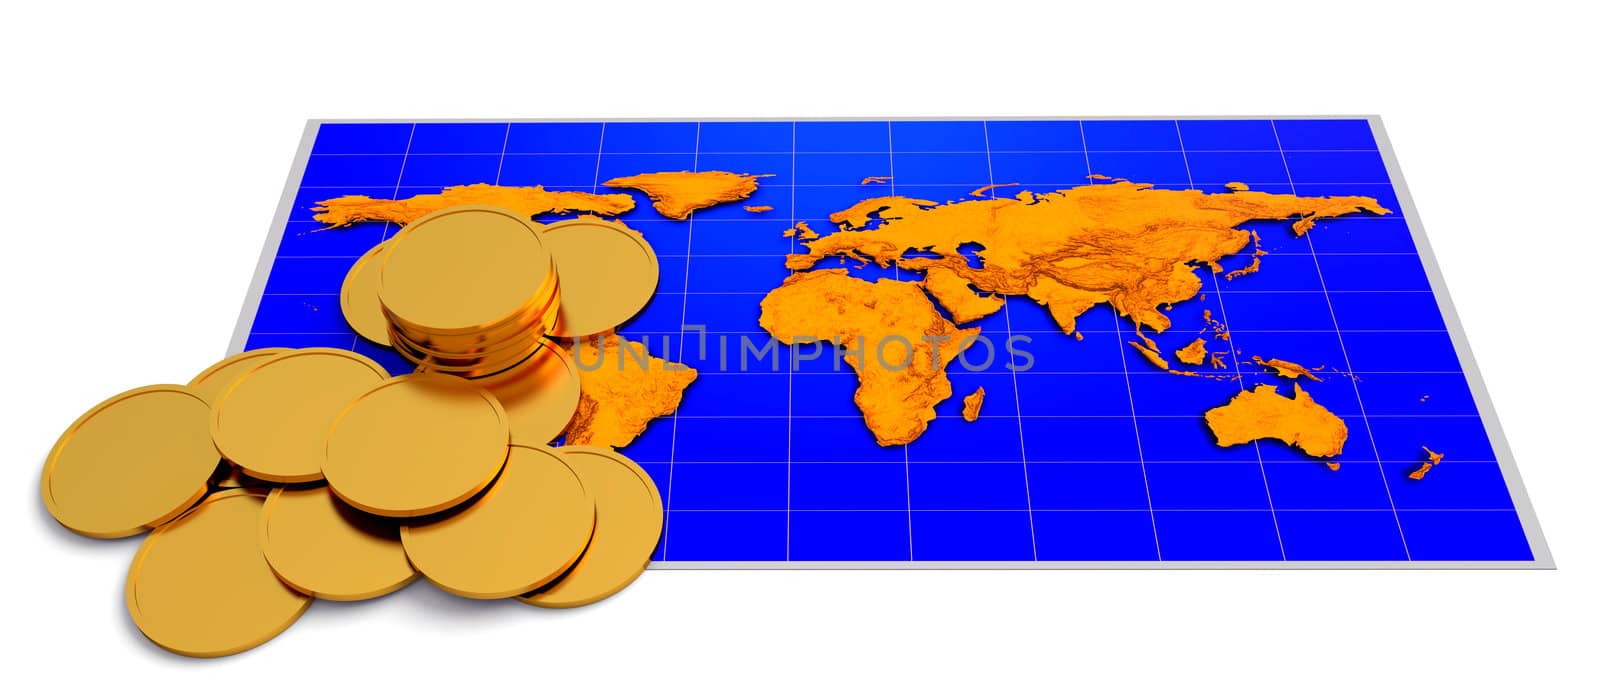 Coins and map by dengess